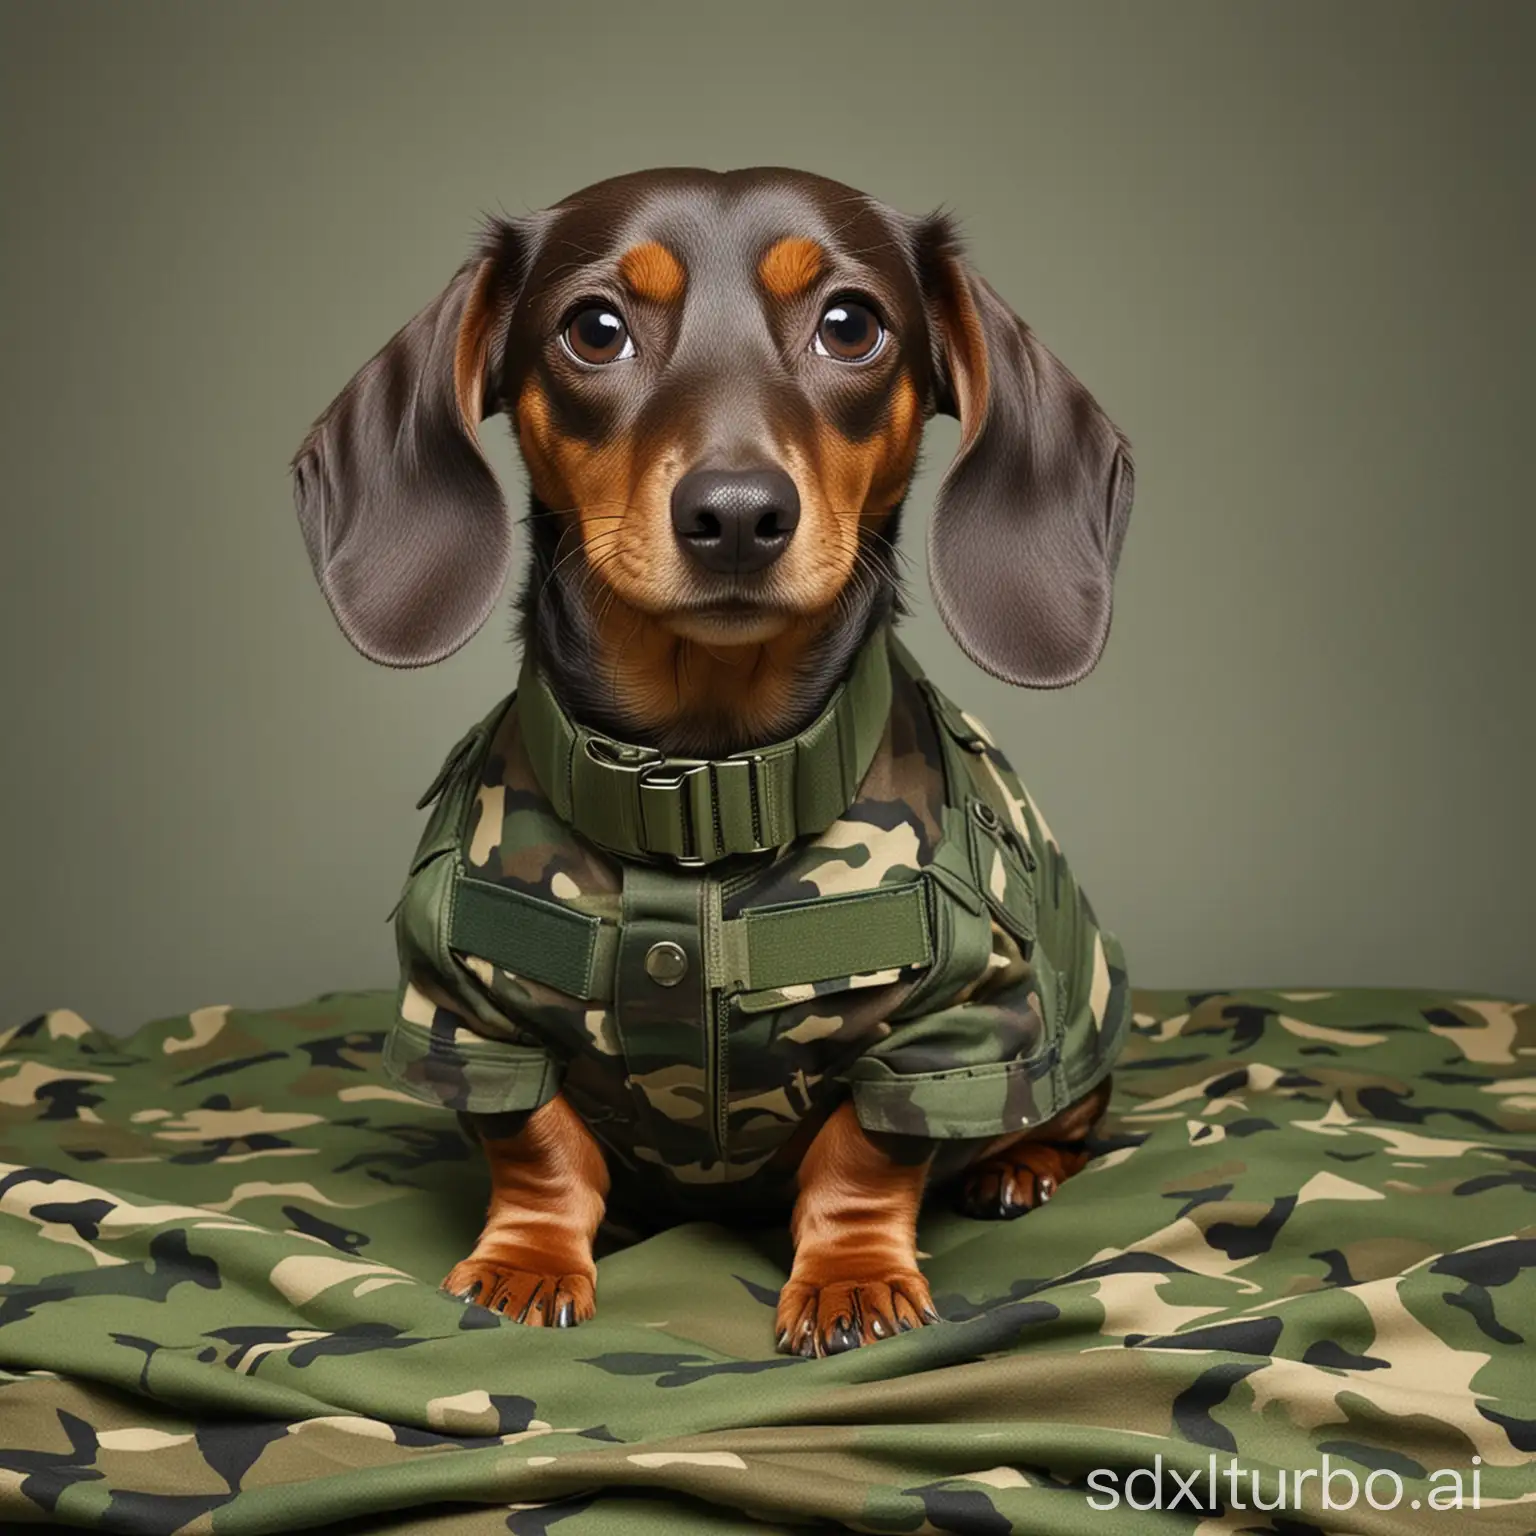 Dachshund-in-Military-Camouflage-Adorable-Canine-Soldier-Blends-into-the-Surroundings